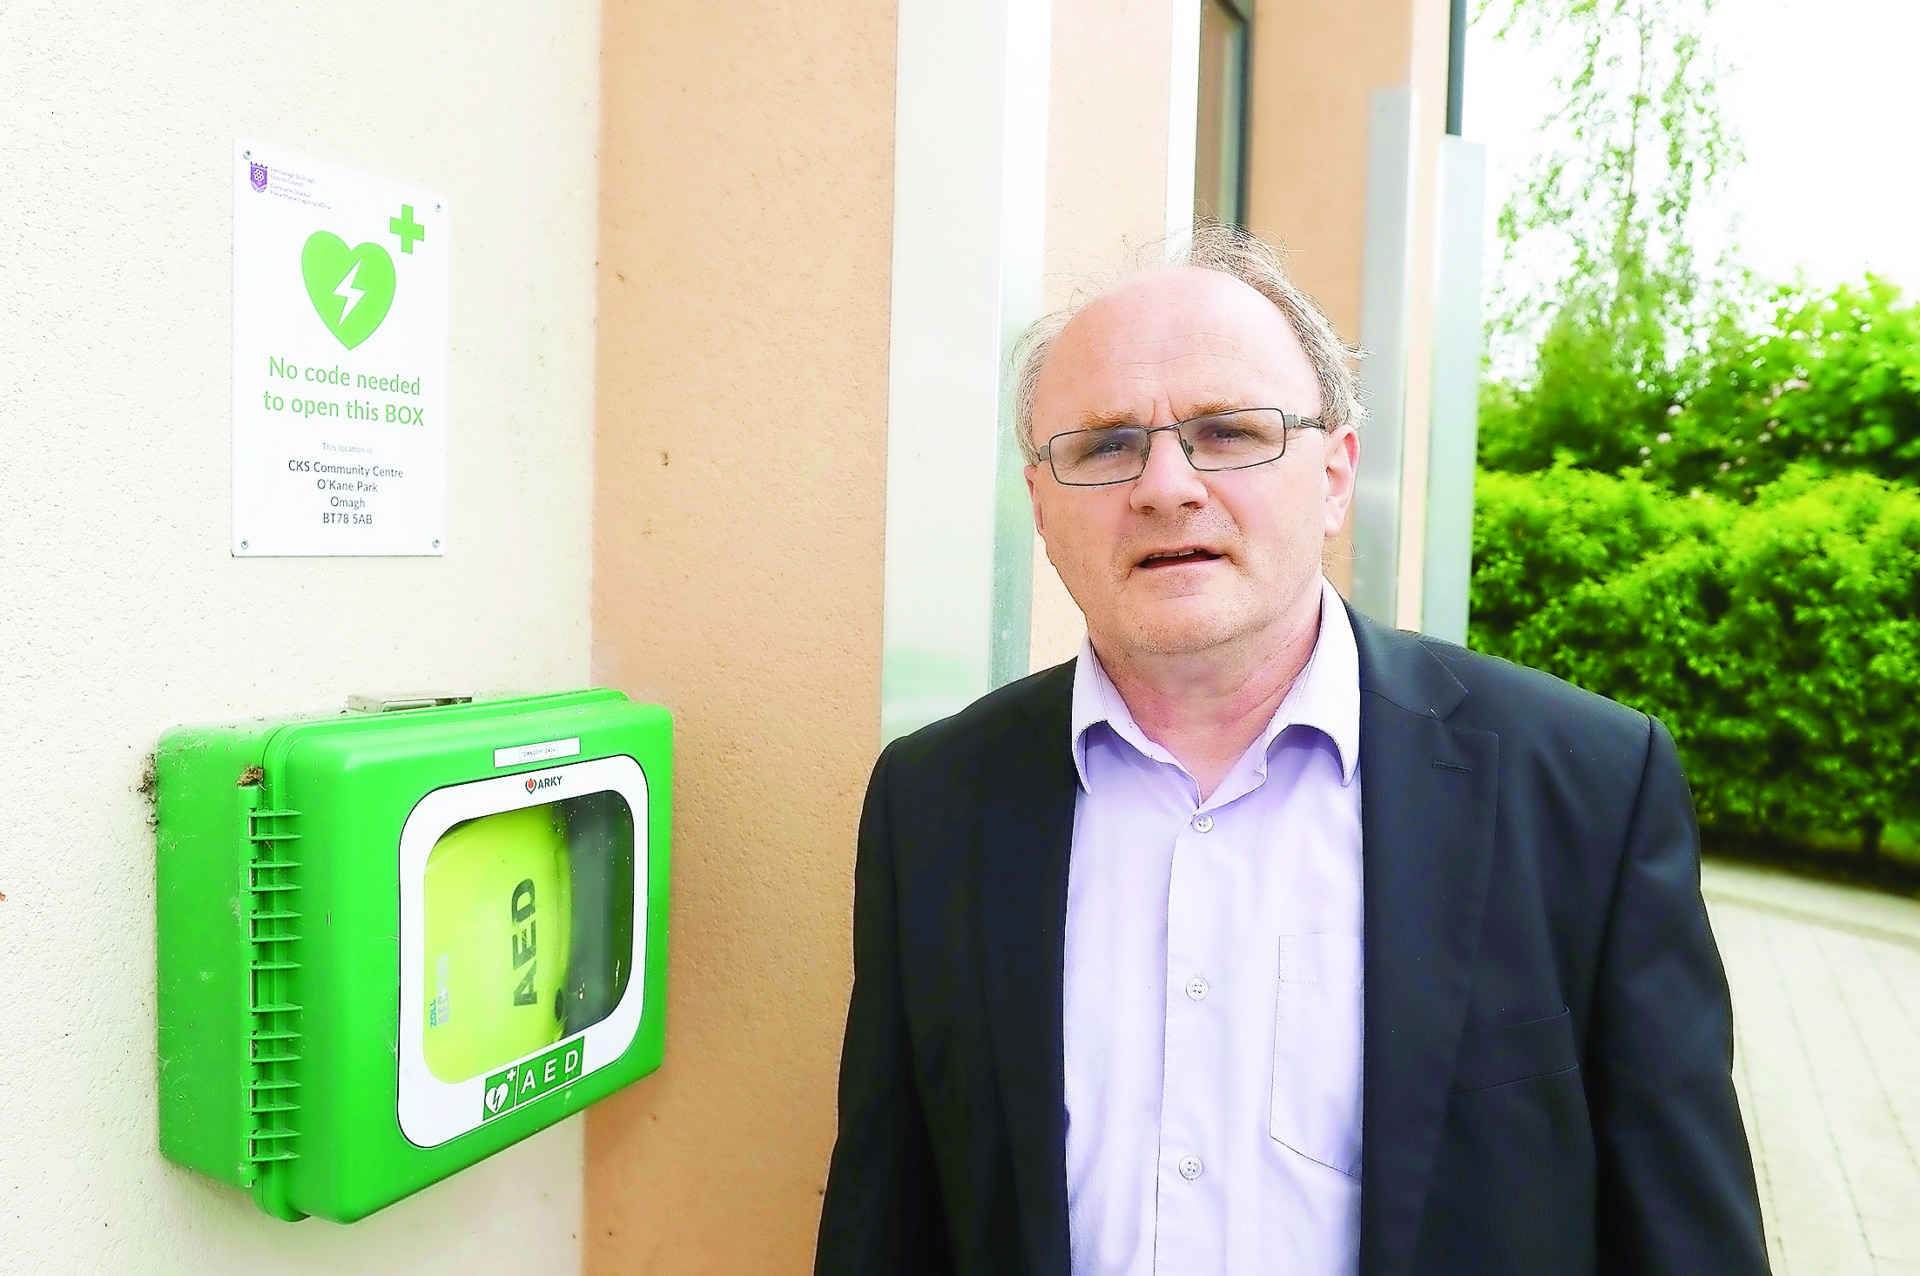 Calls for rapid replacement of vandalised defibrillator in Omagh